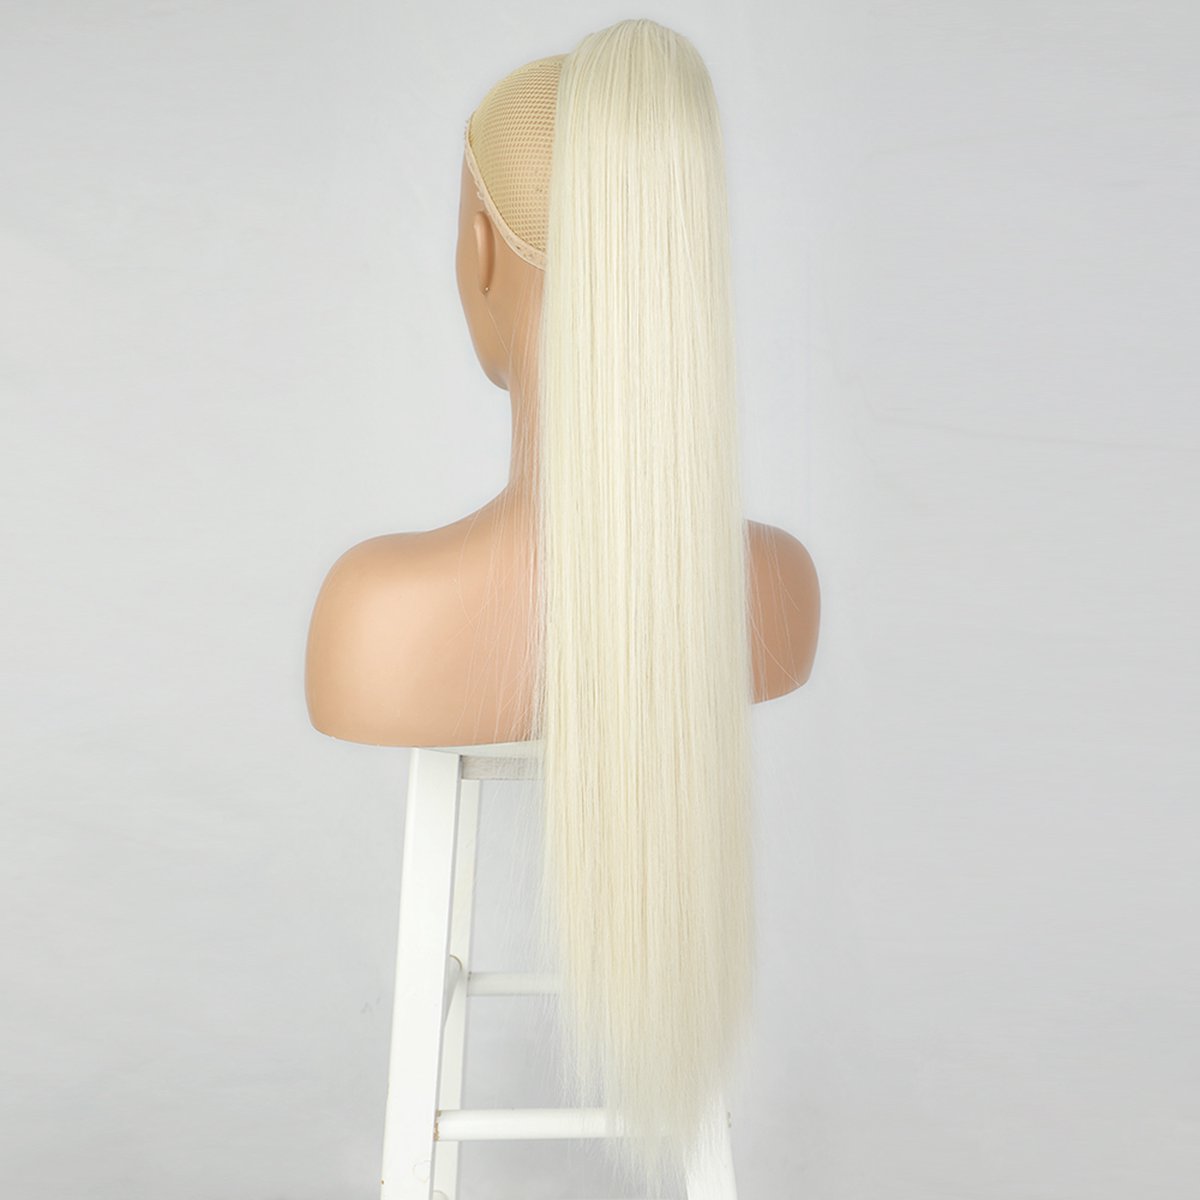 Miss Ponytails - Straight ponytail extentions - 26 inch - Blond 60 - Hair extentions - Haarverlenging